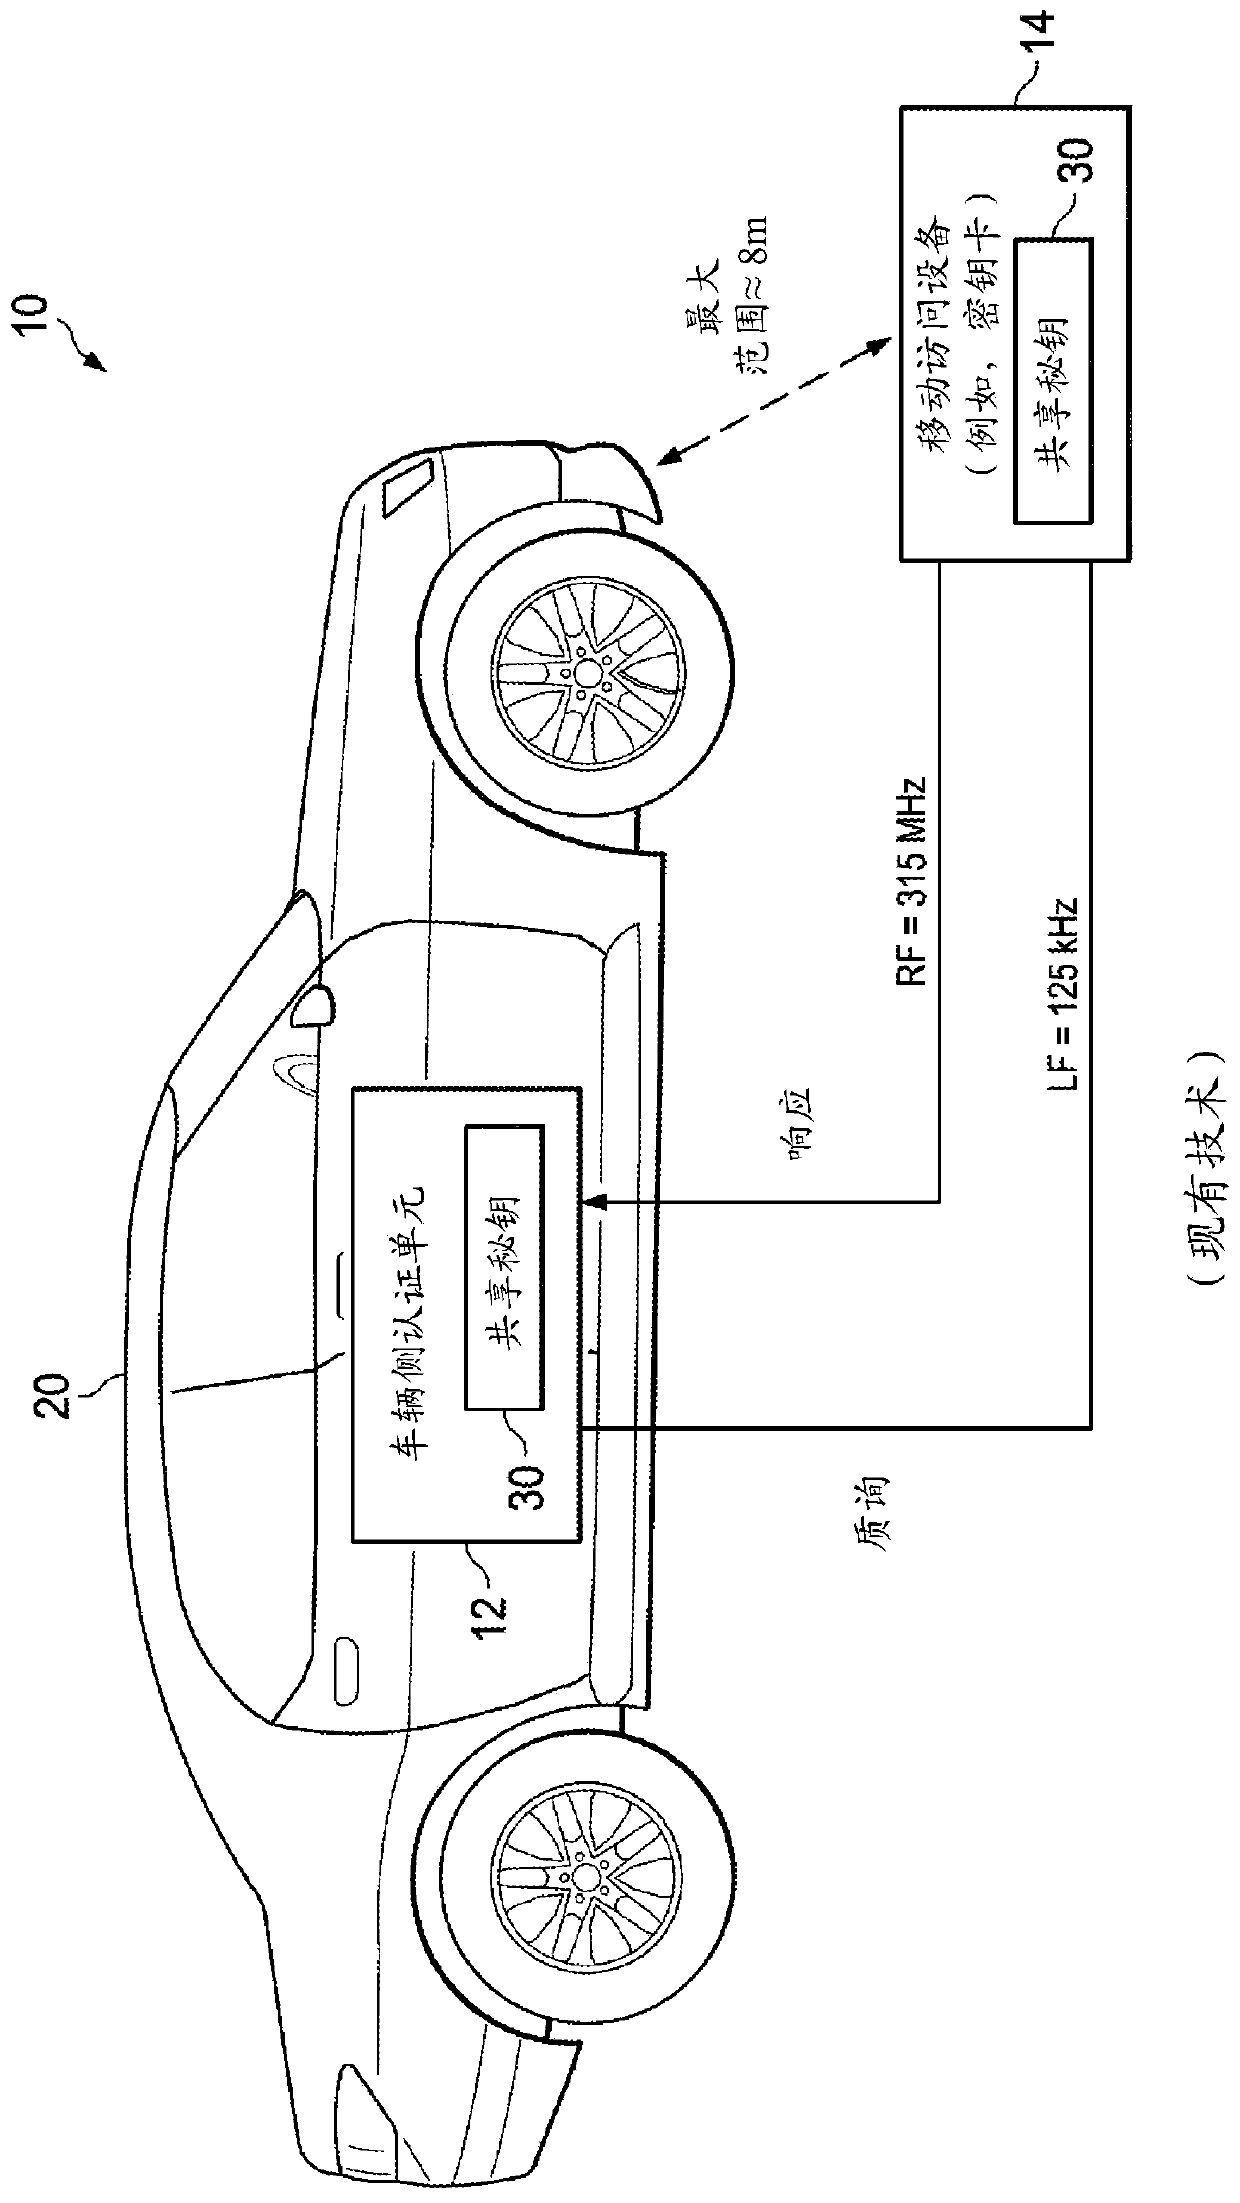 Systems and methods for managing access to a vehicle or other object using environmental data